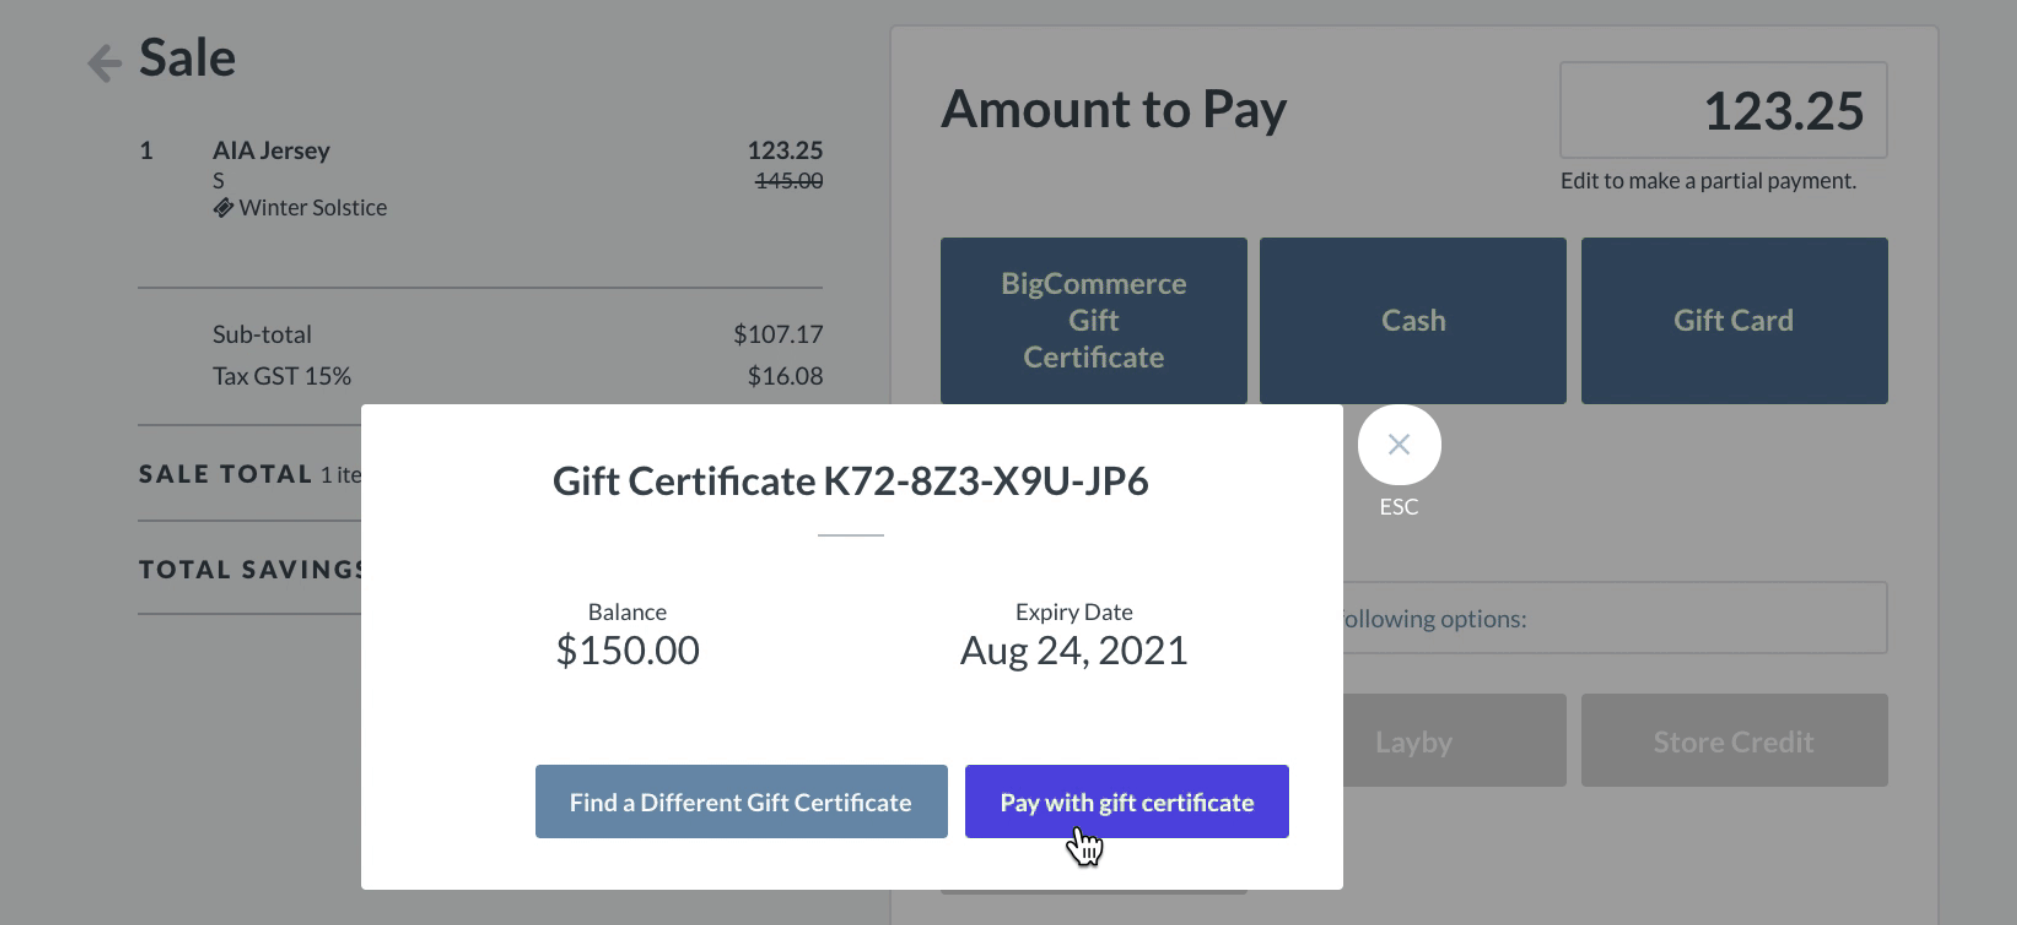 Big-Commerce-Gift-Certificate-Balance.png